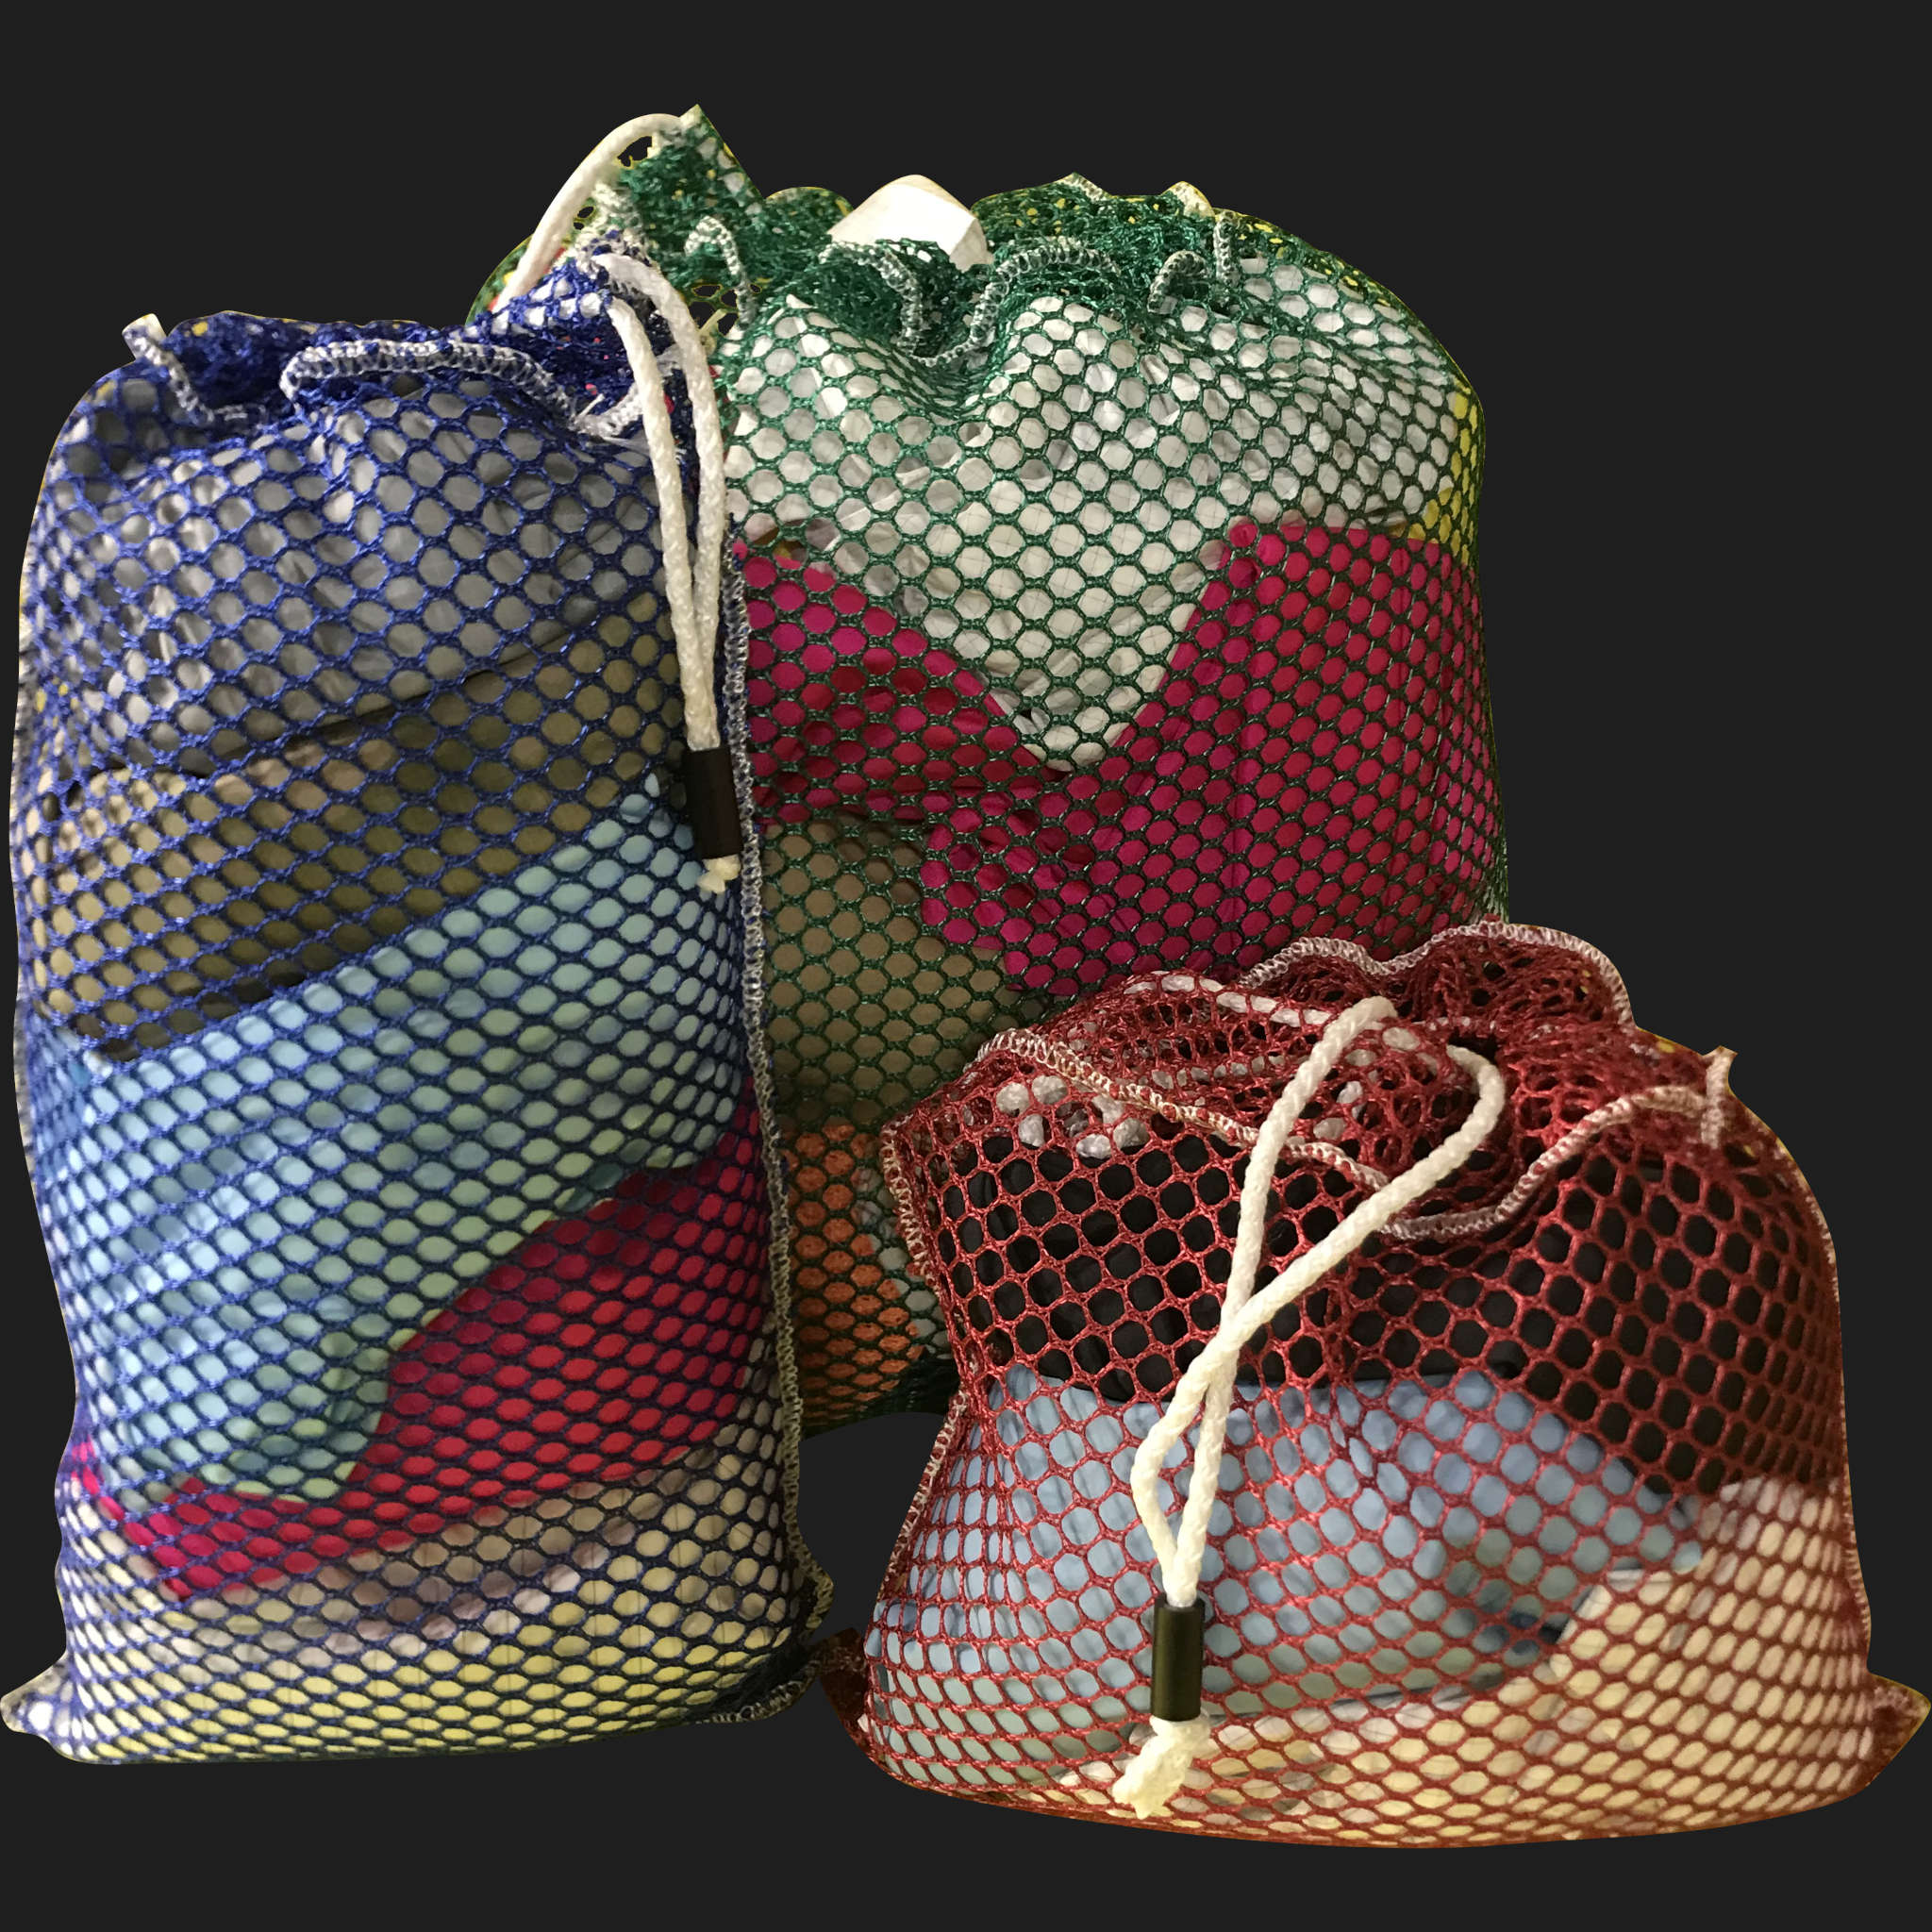 14" x 34" Customized Mesh-Net-Laundry Bags Heavy Duty with Cord and barrellock closure